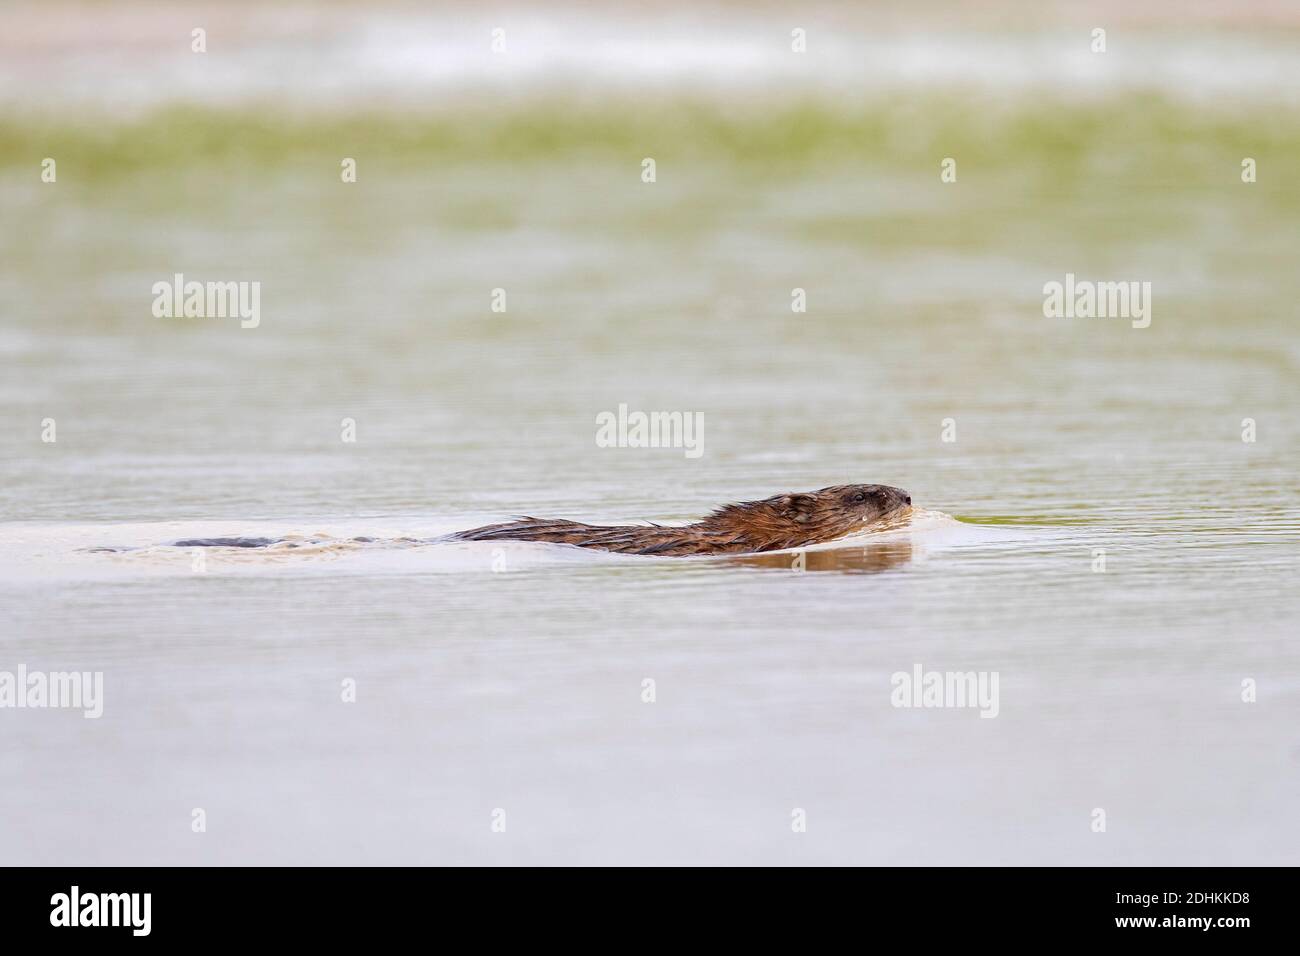 Muskrat (Ondatra zibethicus) introduced species native to North America swimming in pond Stock Photo